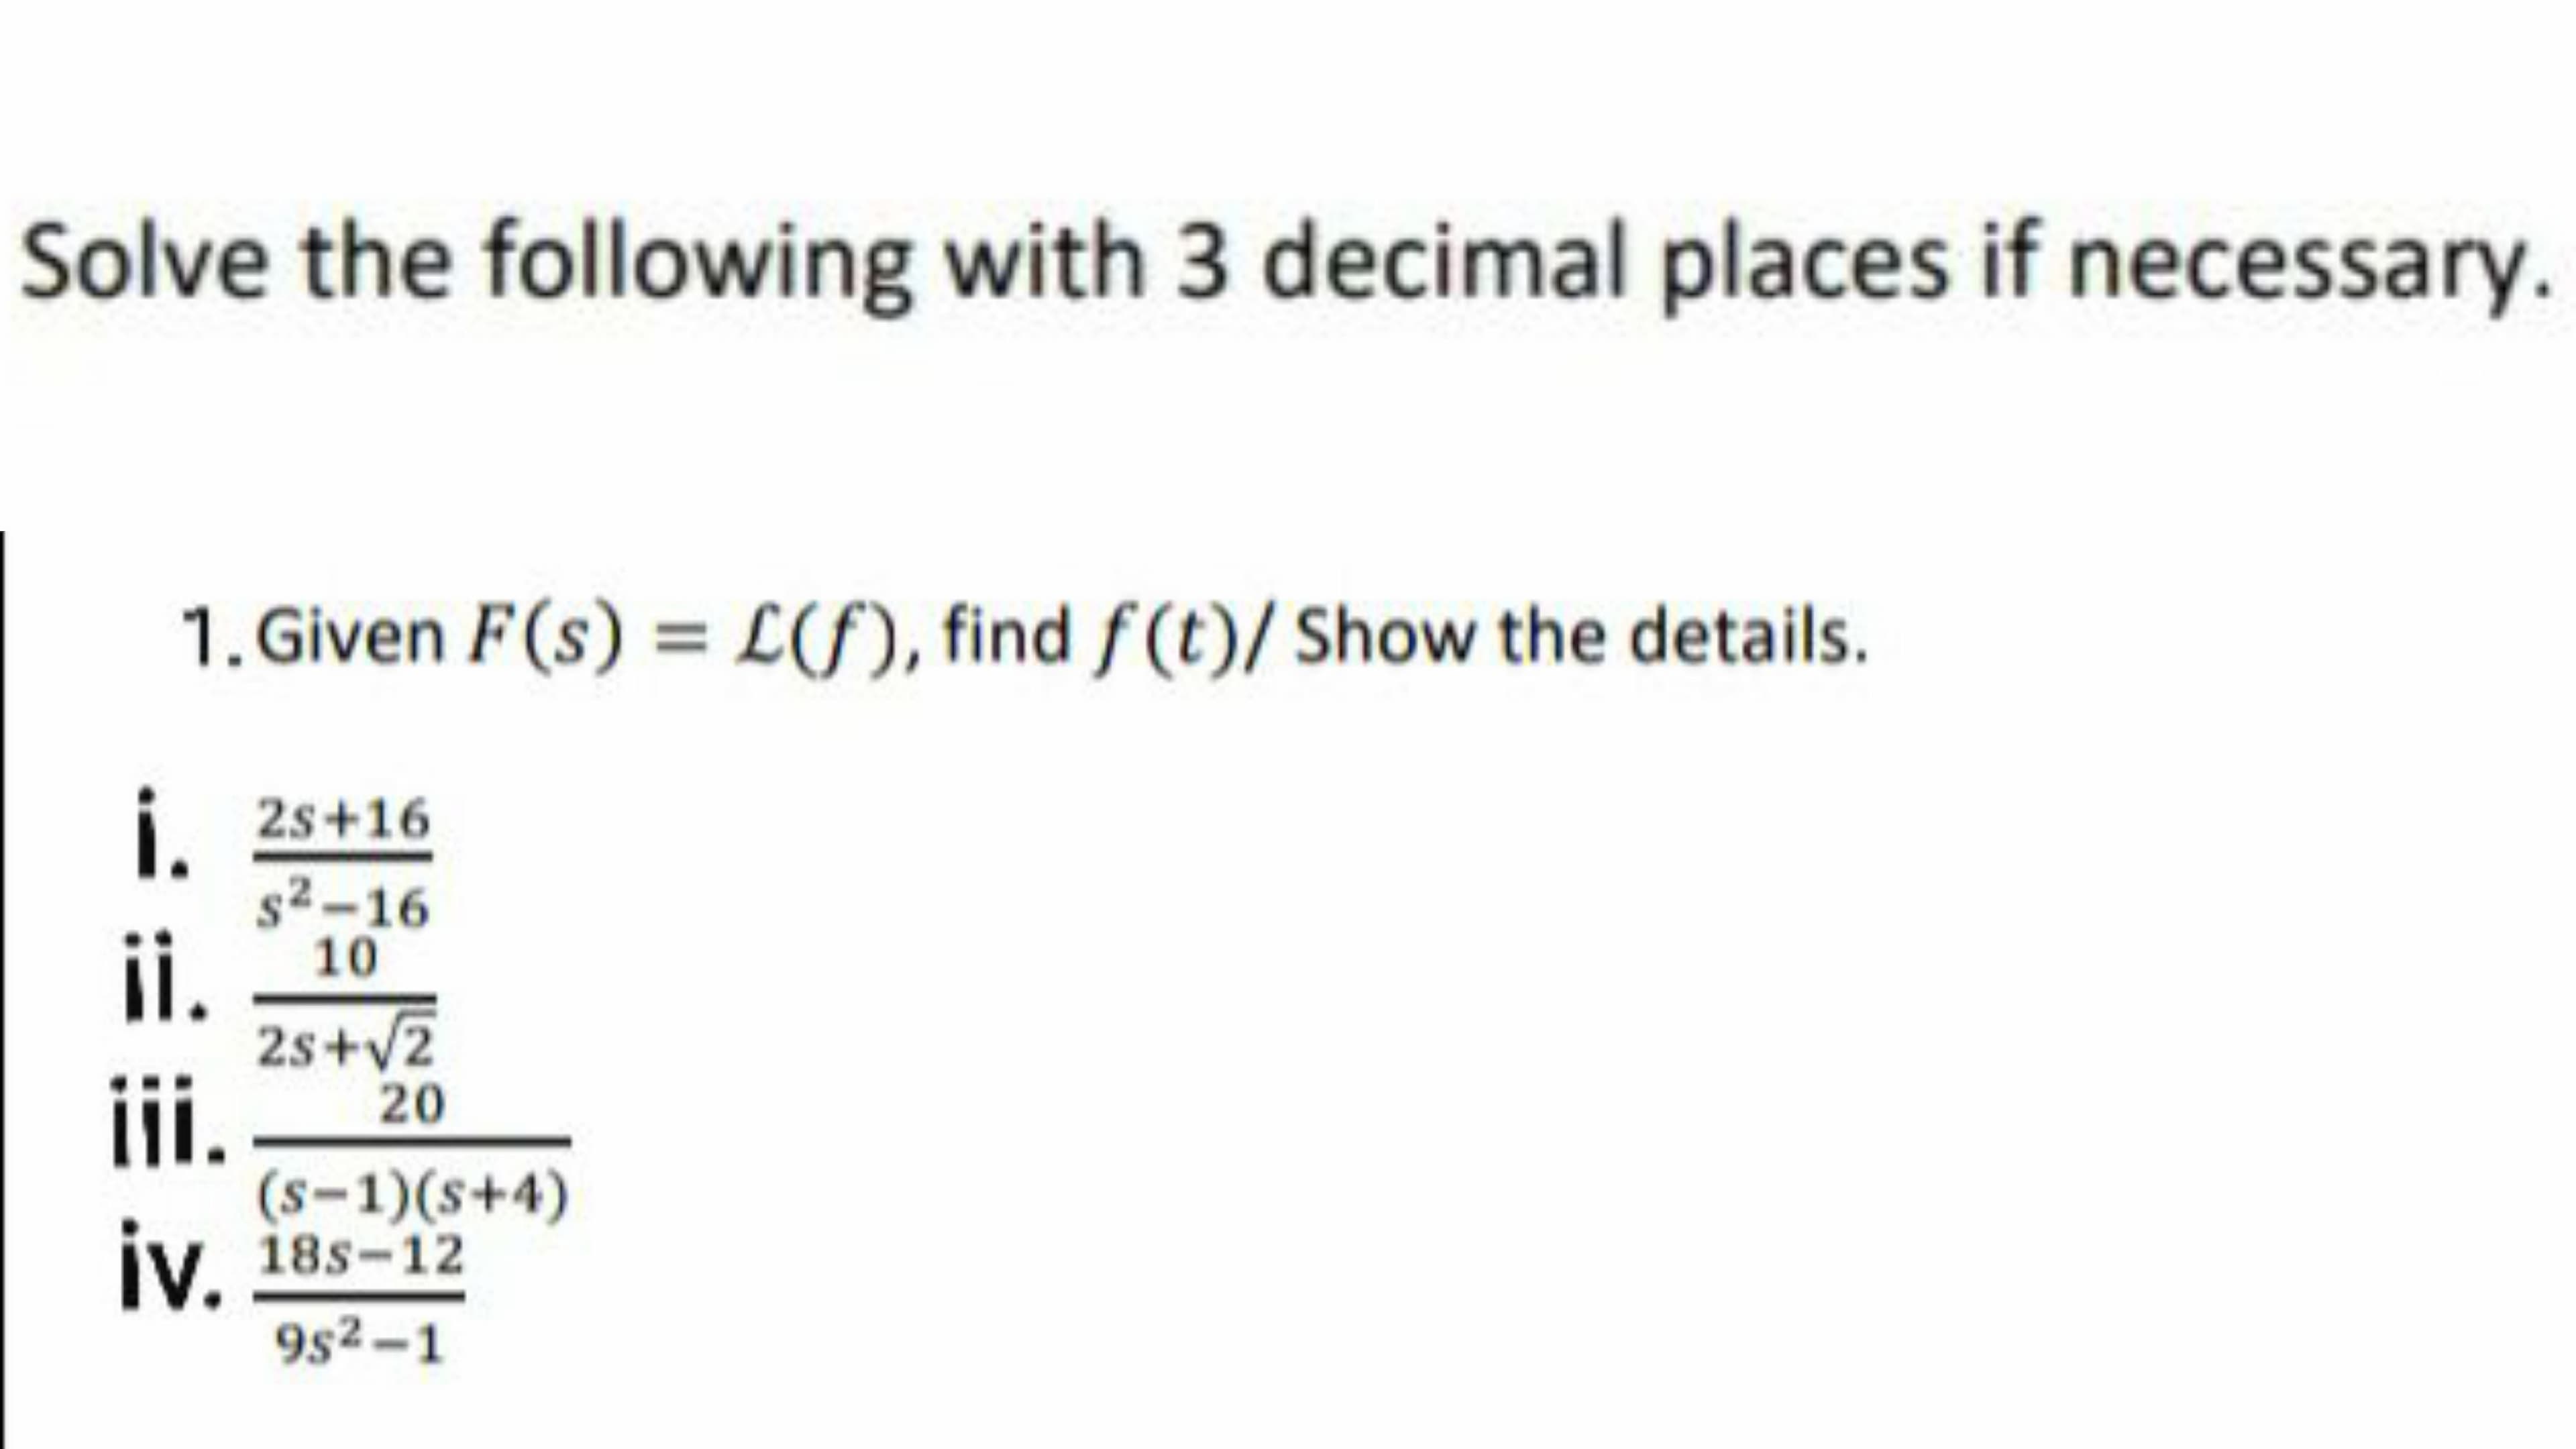 Solve the following with 3 decimal places if necessary.
1. Given F(s) = L(S), find f(t)/ Show the details.
i.
i. 2s+16
s2-16
¡i. _ 10
2s+v2
20
ii.
(s-1)(s+4)
iv, 18s-12
9s2-1
